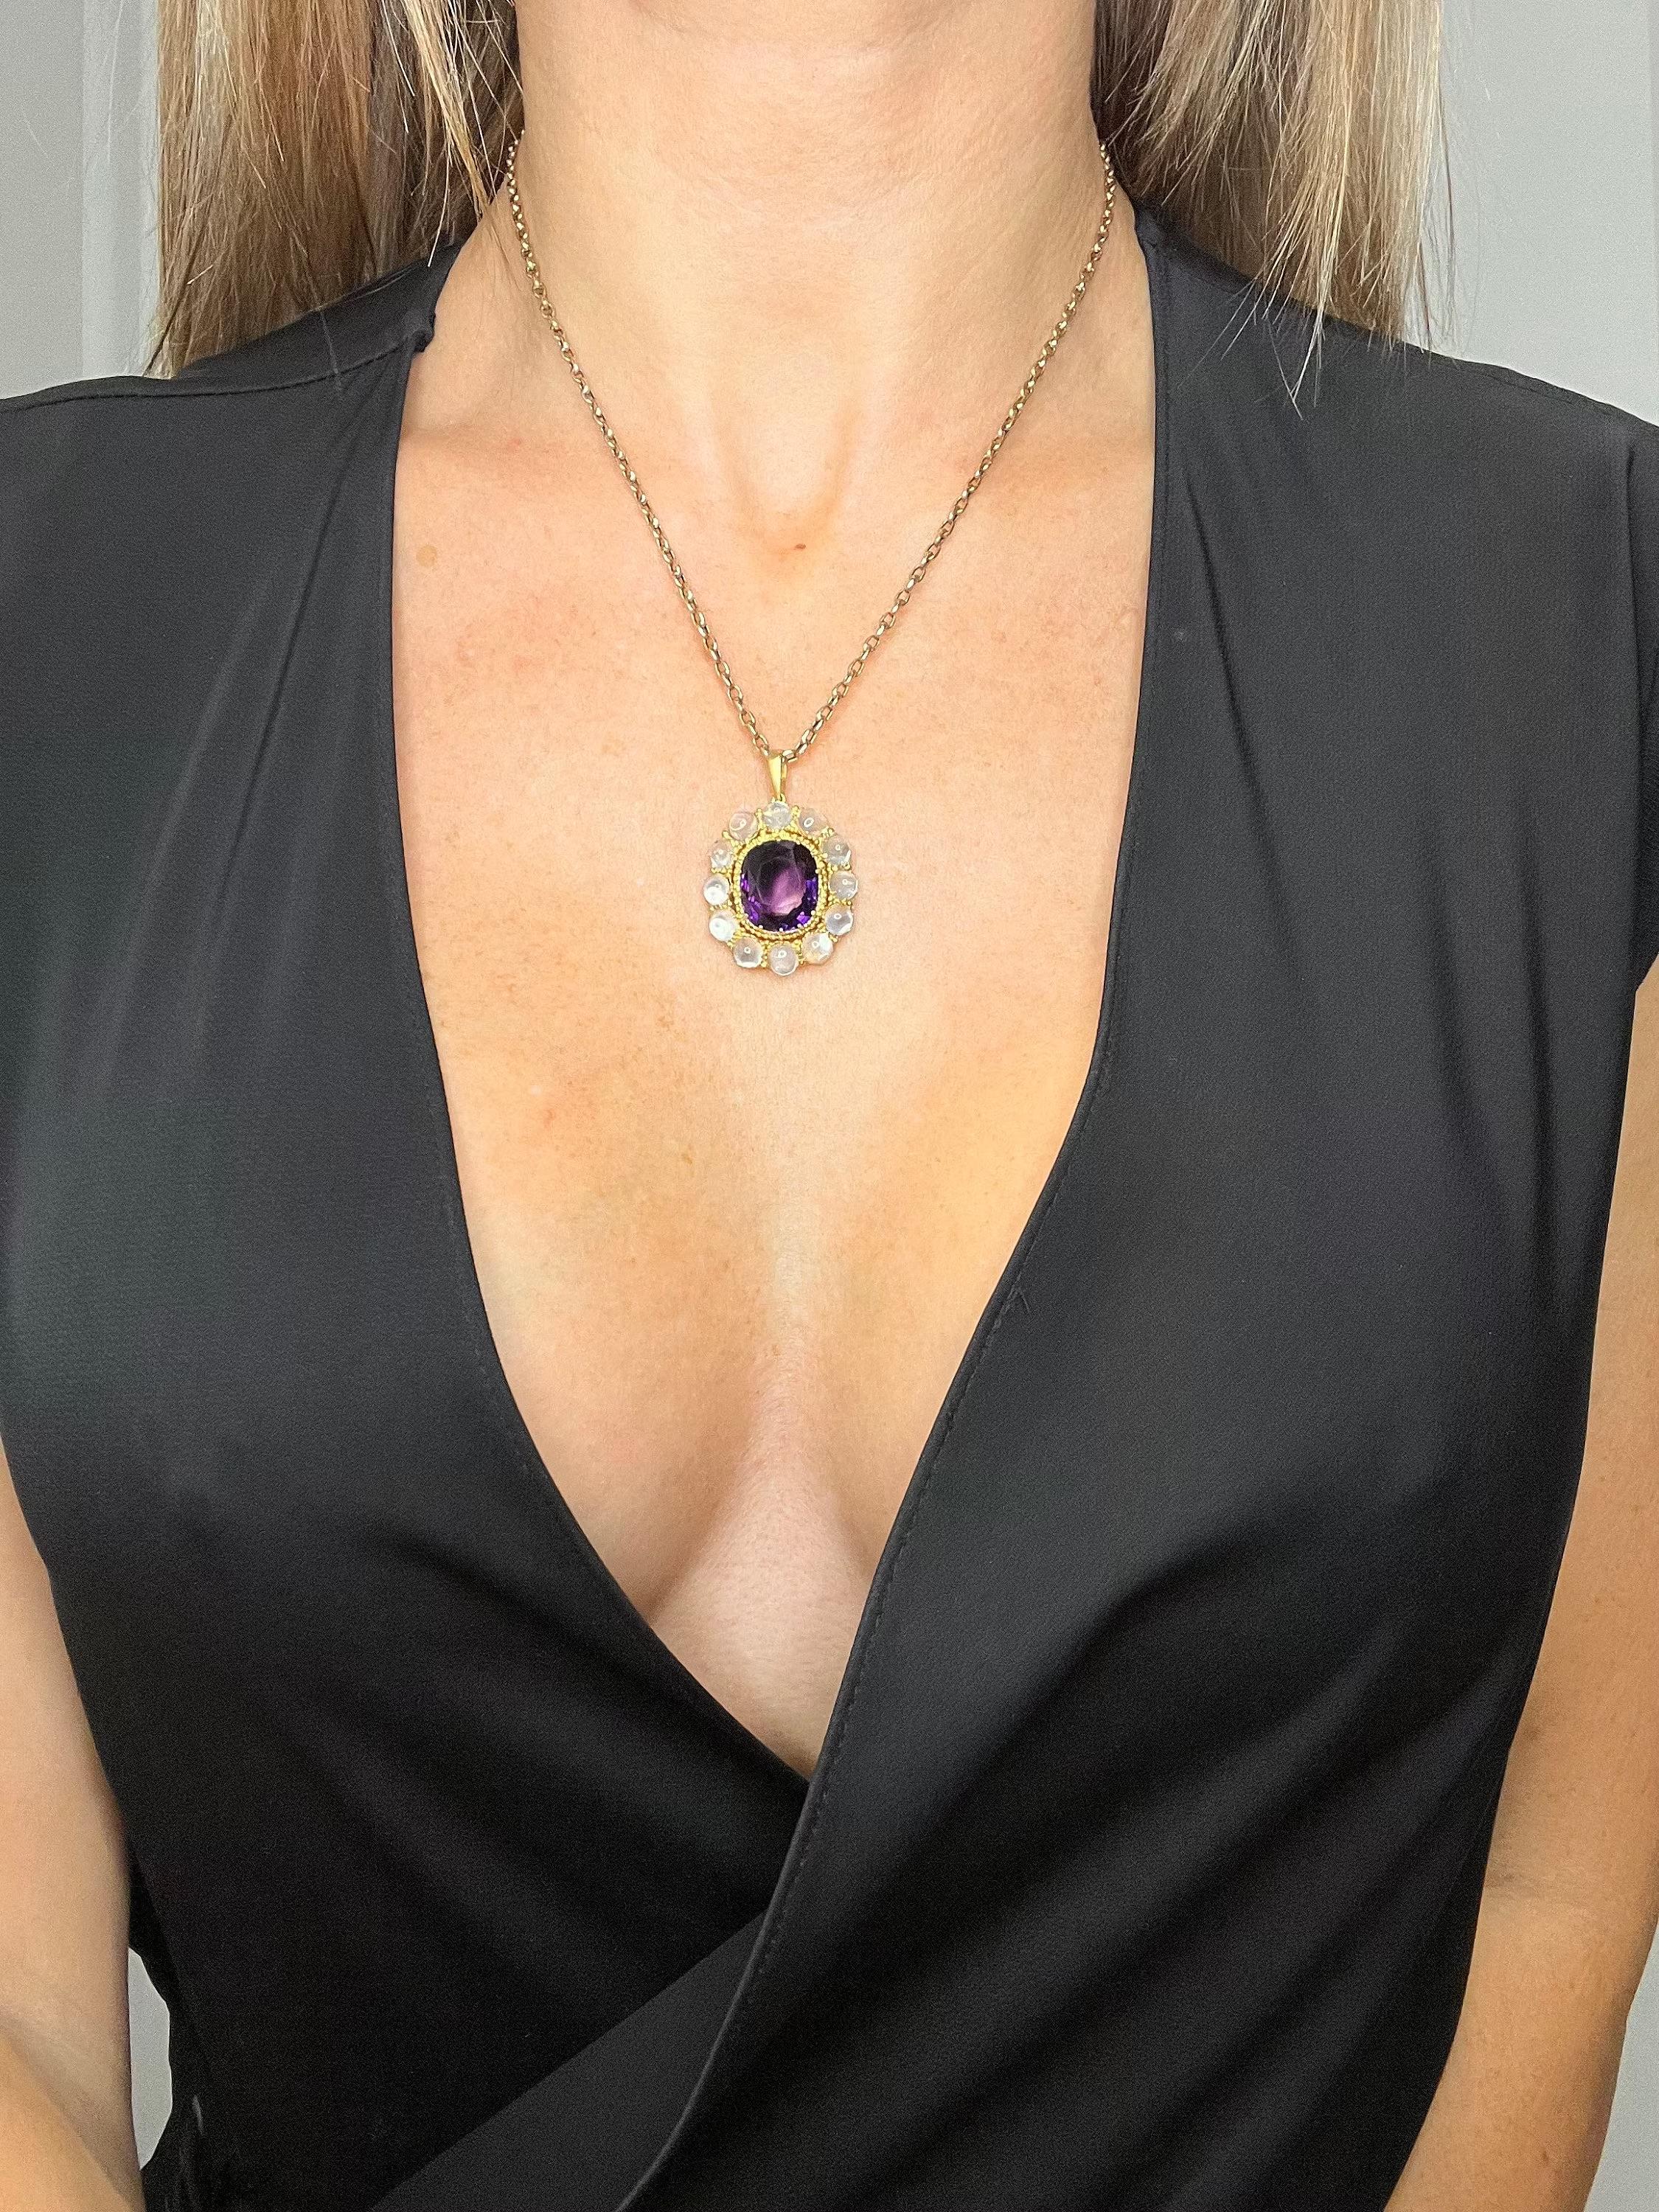 Amethyst & Moonstone Pendant

15ct Gold Tested

Circa 1850 

This large, oval, faceted Amethyst Victorian pendant is a true beauty. The Amethyst is framed in 15ct yellow gold, which adds a touch of elegance to it. The border of 12 Moonstones gives